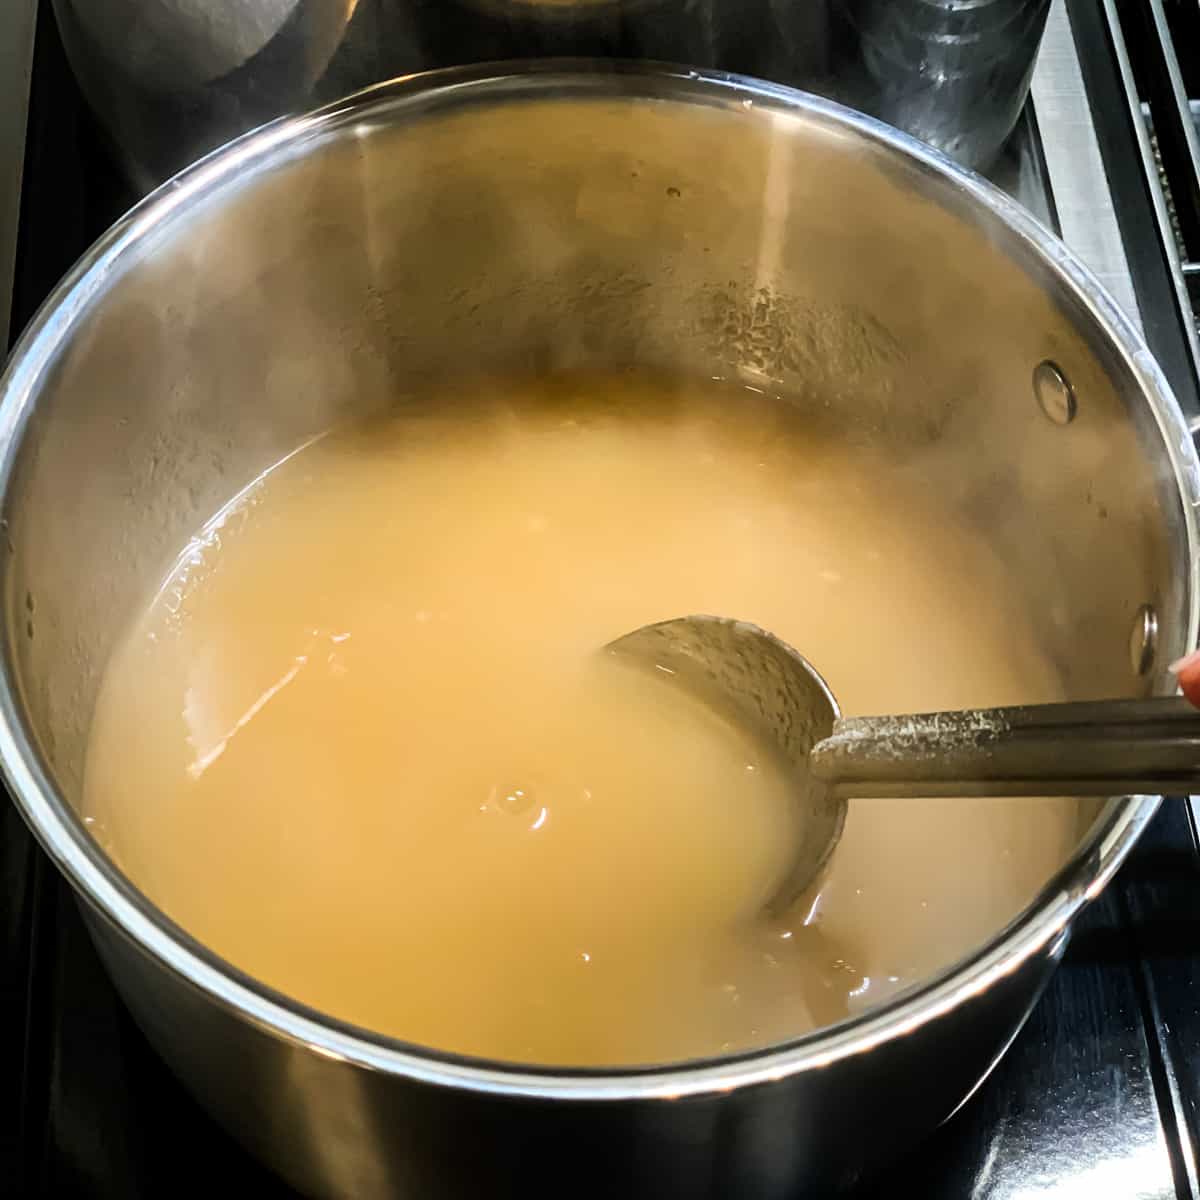 stirring the apple jelly mixture in a pot